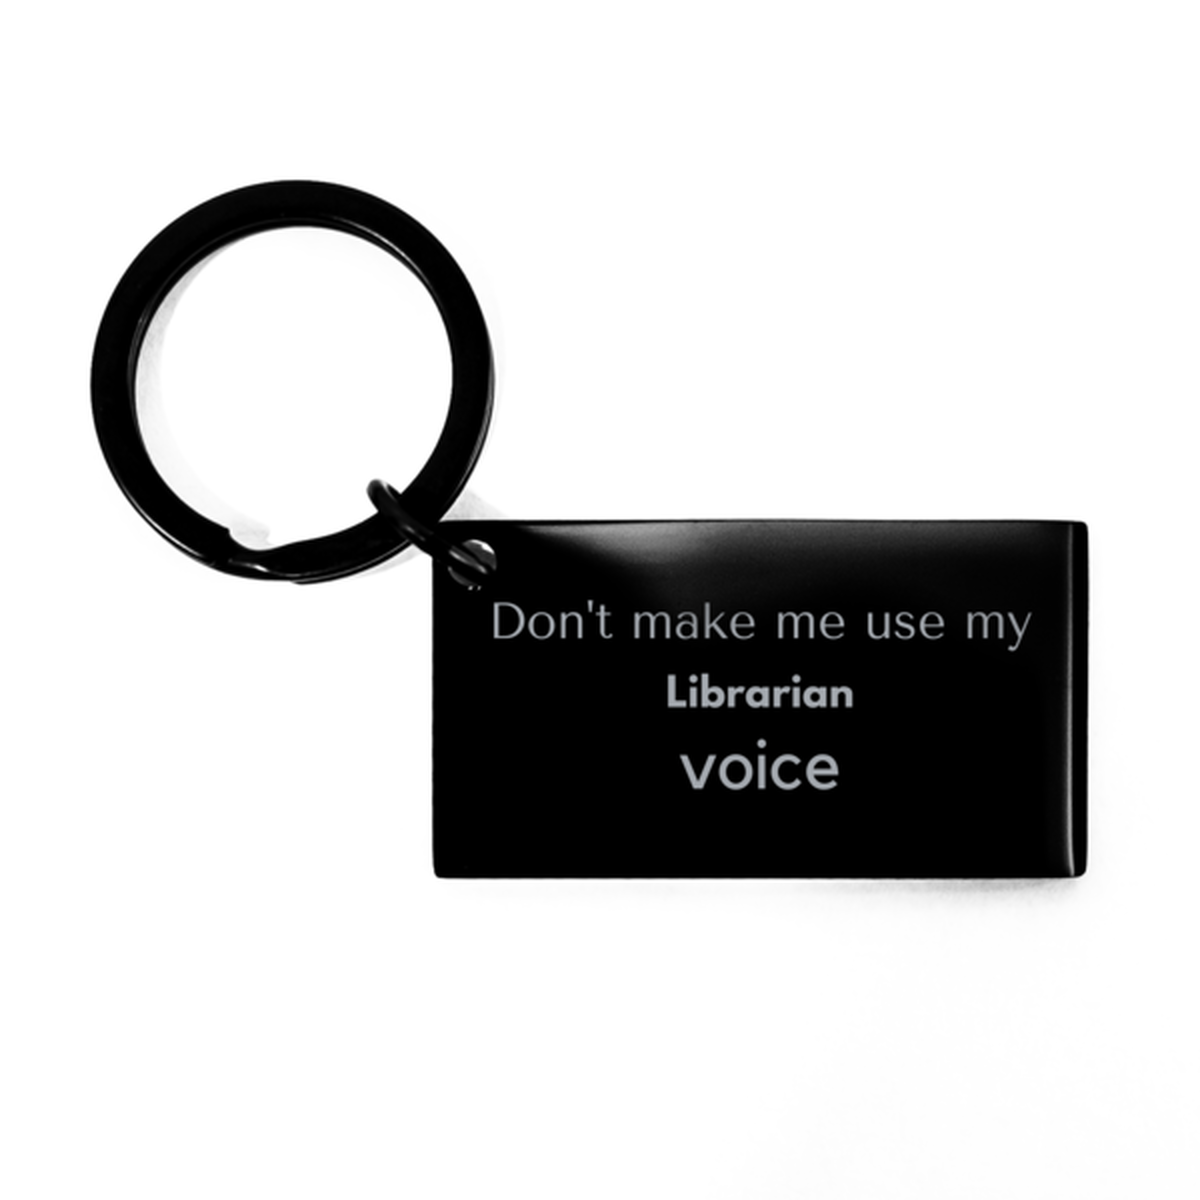 Don't make me use my Librarian voice, Sarcasm Librarian Gifts, Christmas Librarian Keychain Birthday Unique Gifts For Librarian Coworkers, Men, Women, Colleague, Friends